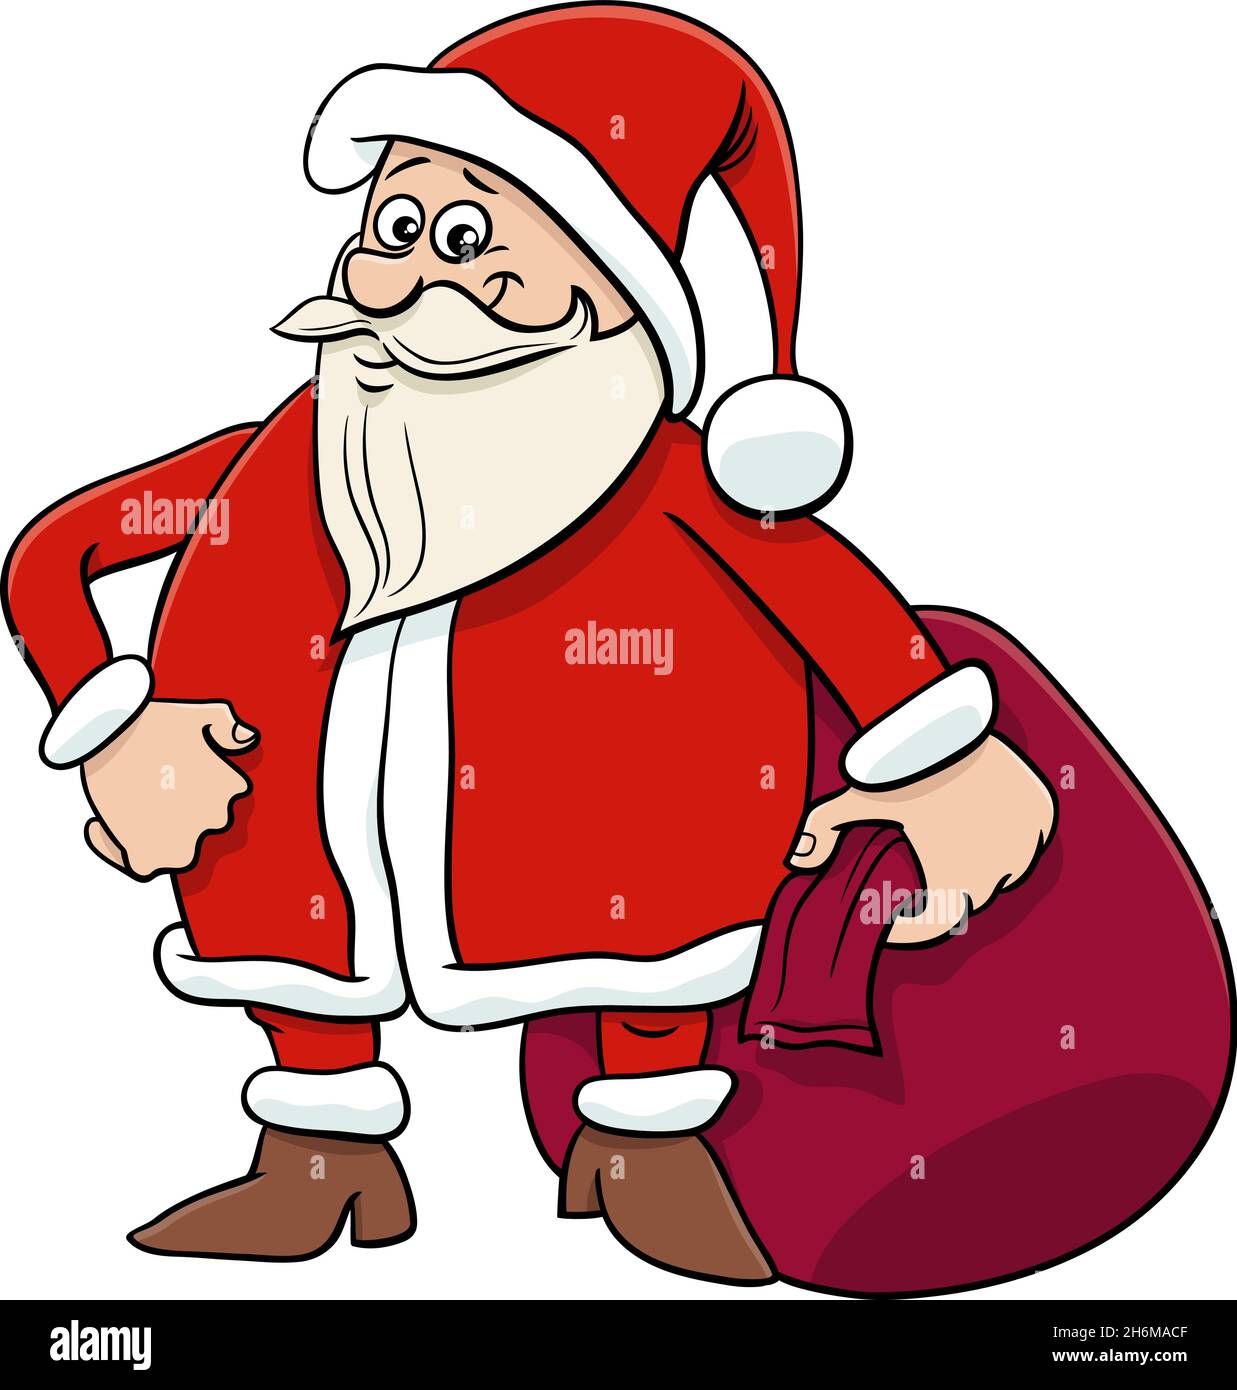 Cartoon illustration of funny Santa Claus character with sack of